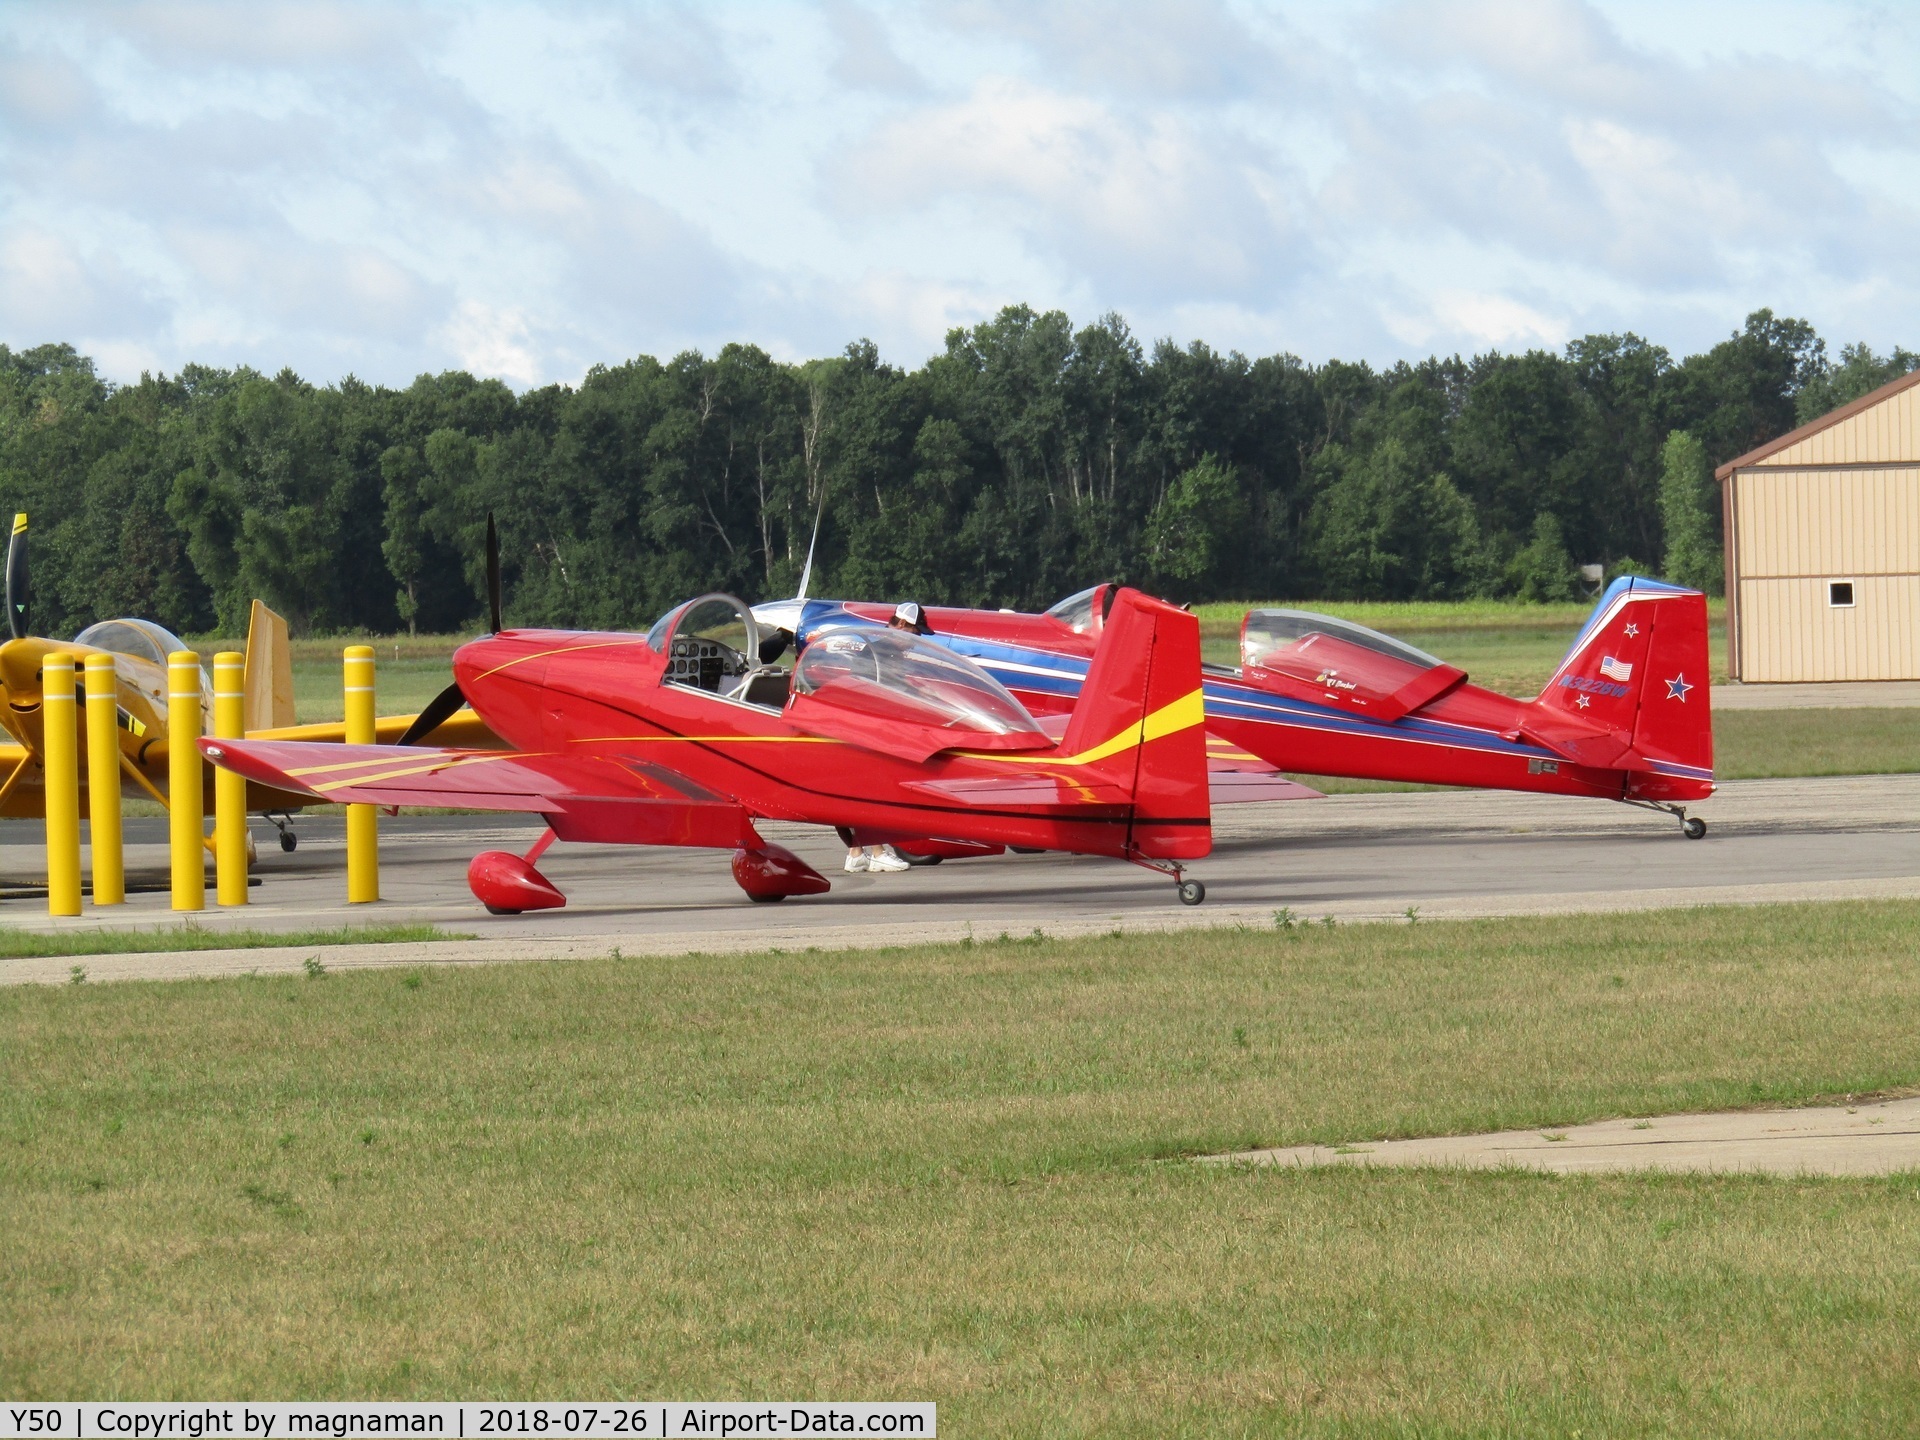 Wautoma Municipal Airport (Y50) - nice pair of reds at Wautoma.
Nearest to camera a mystery aircraft!
If you know the N number please e-mail me!!!